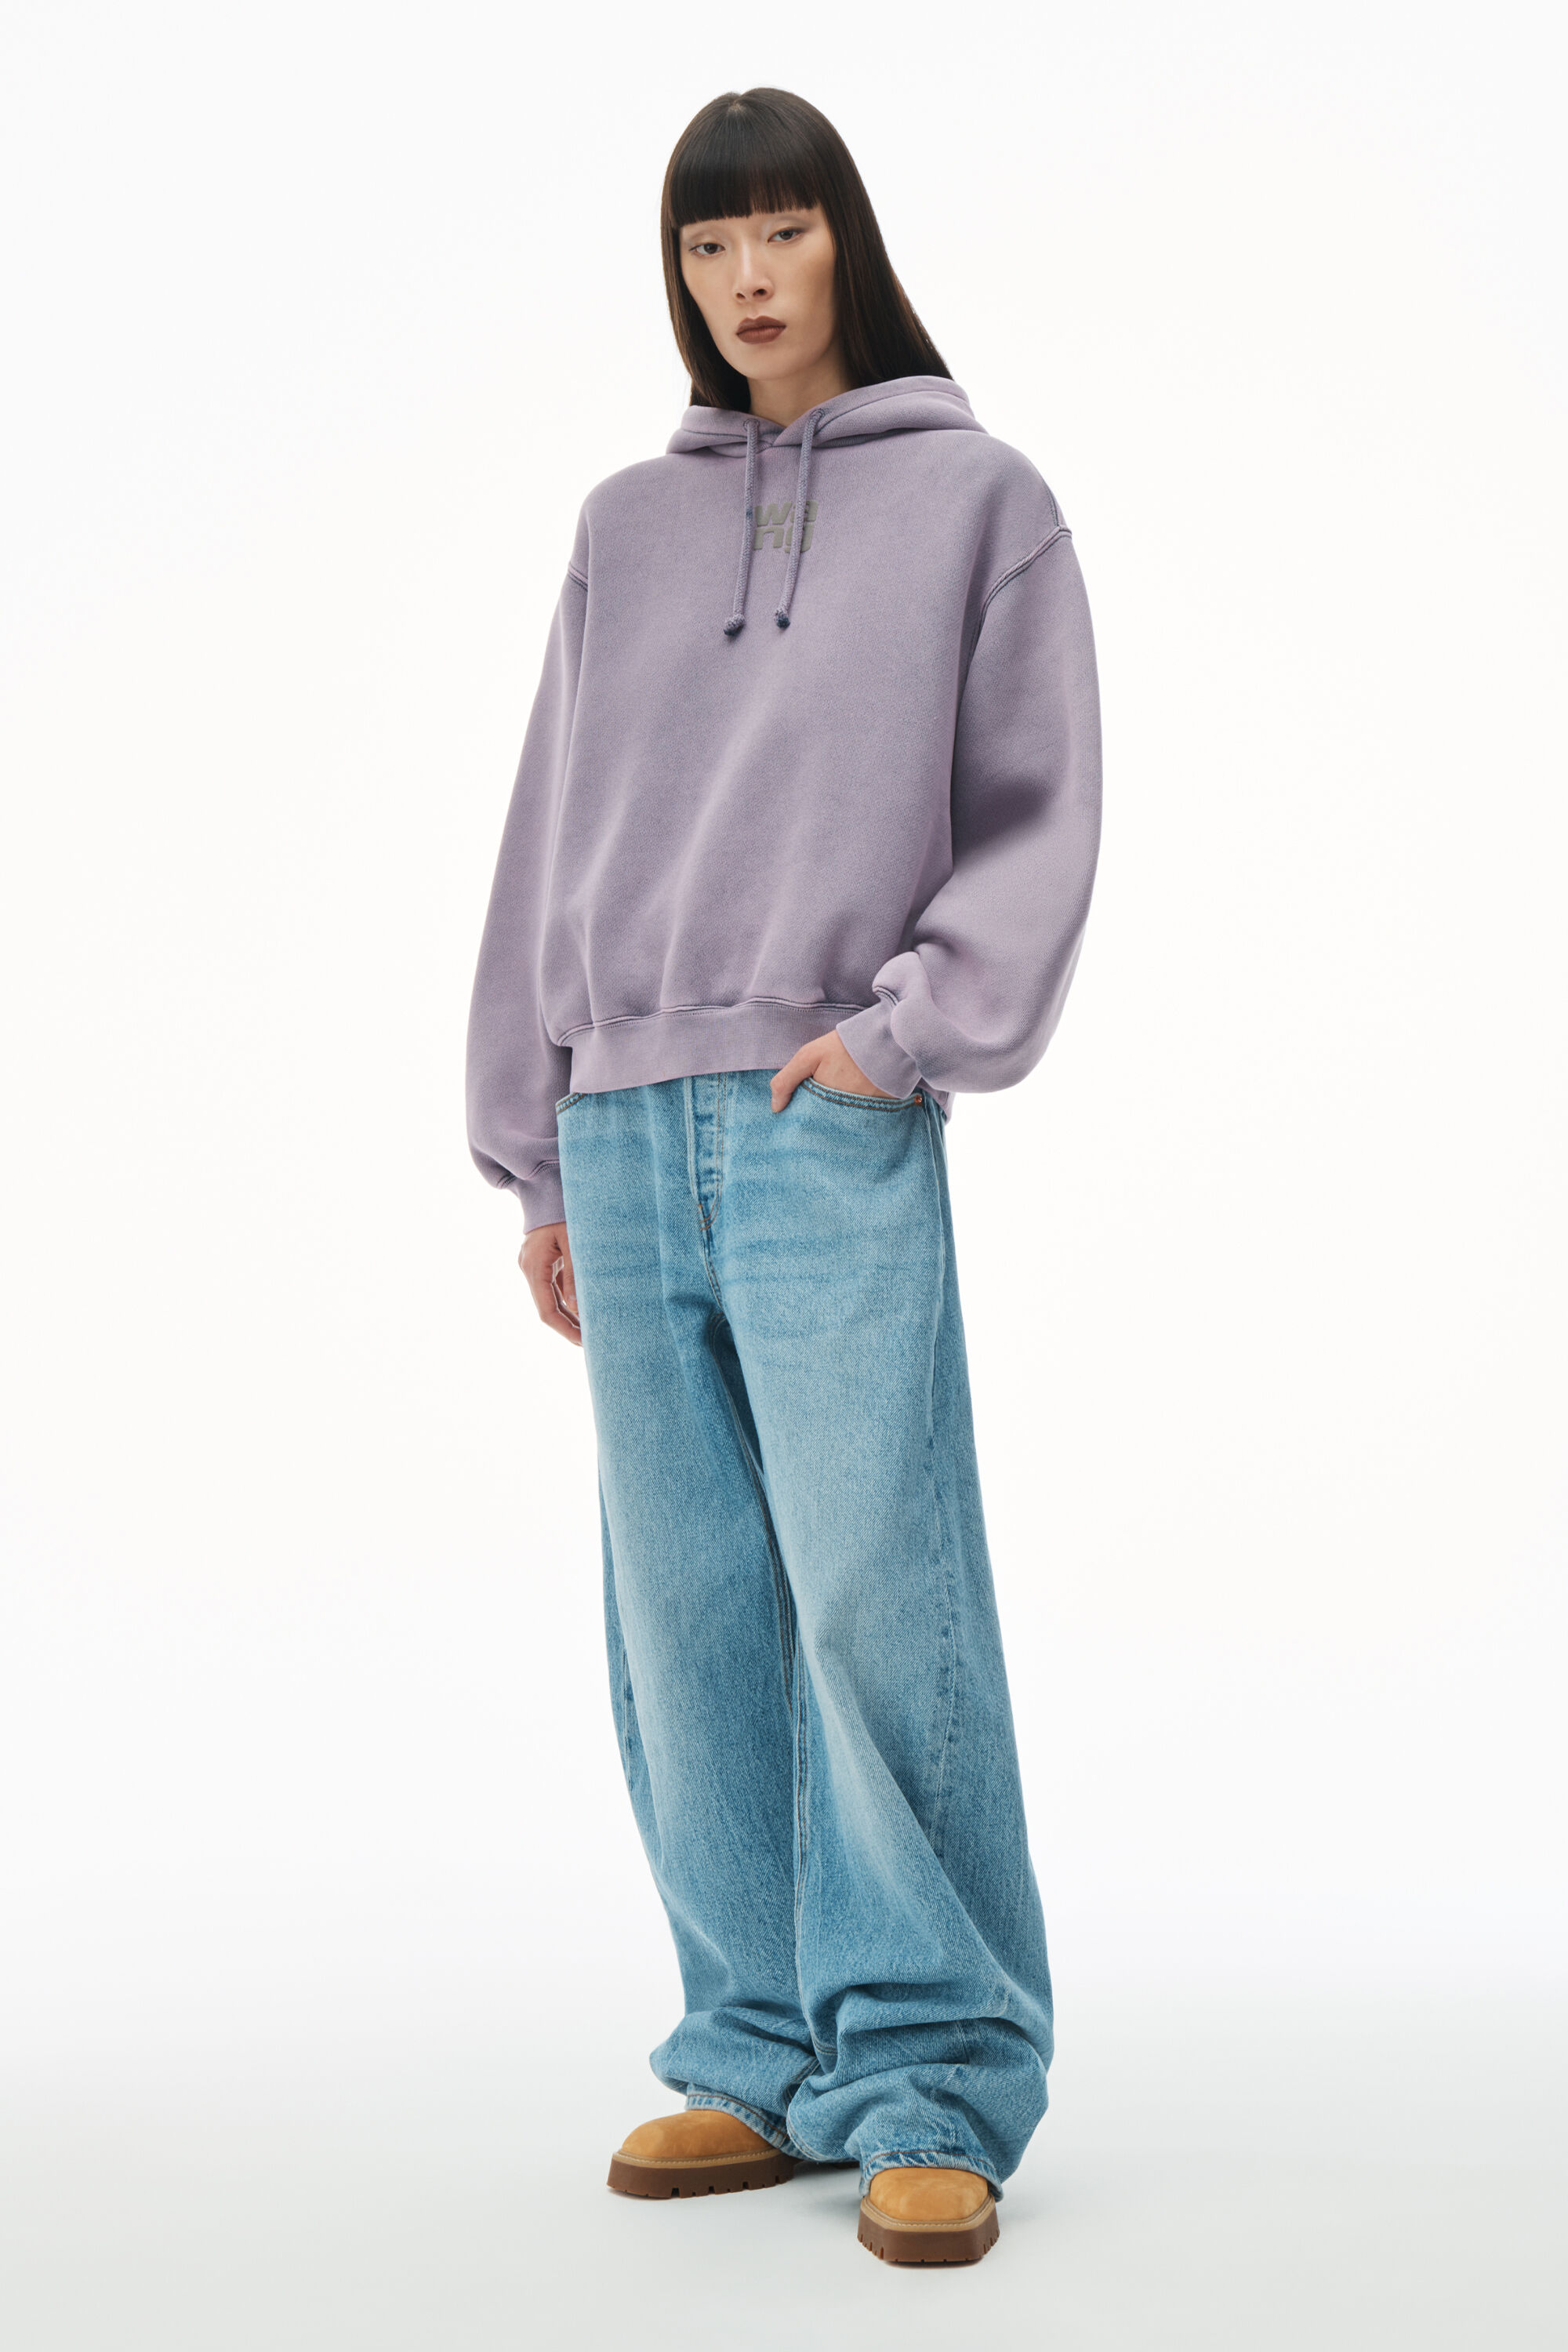 puff logo hoodie in structured terry in ACID PINK LAVENDER 